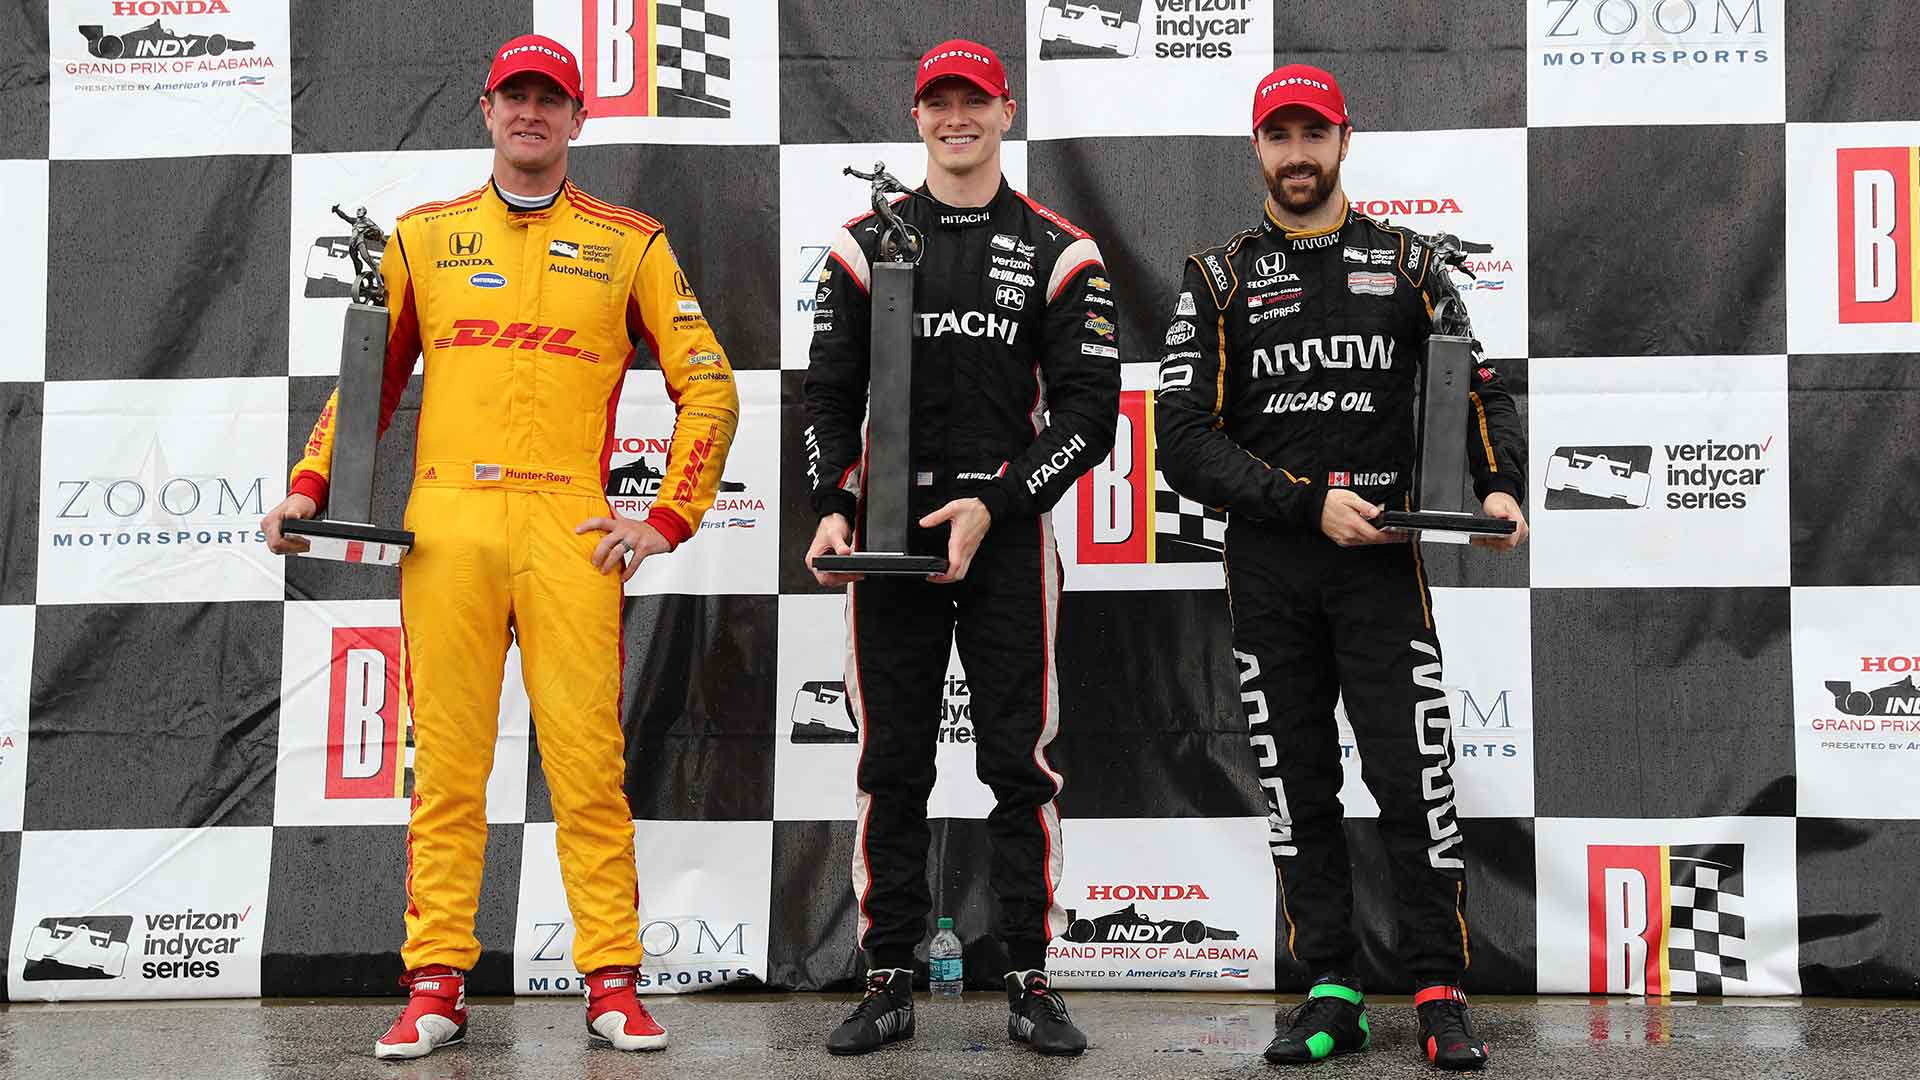 Josef Newgarden, Ryan Hunter-Reay and James Hinchcliffe line up for a podium shoot